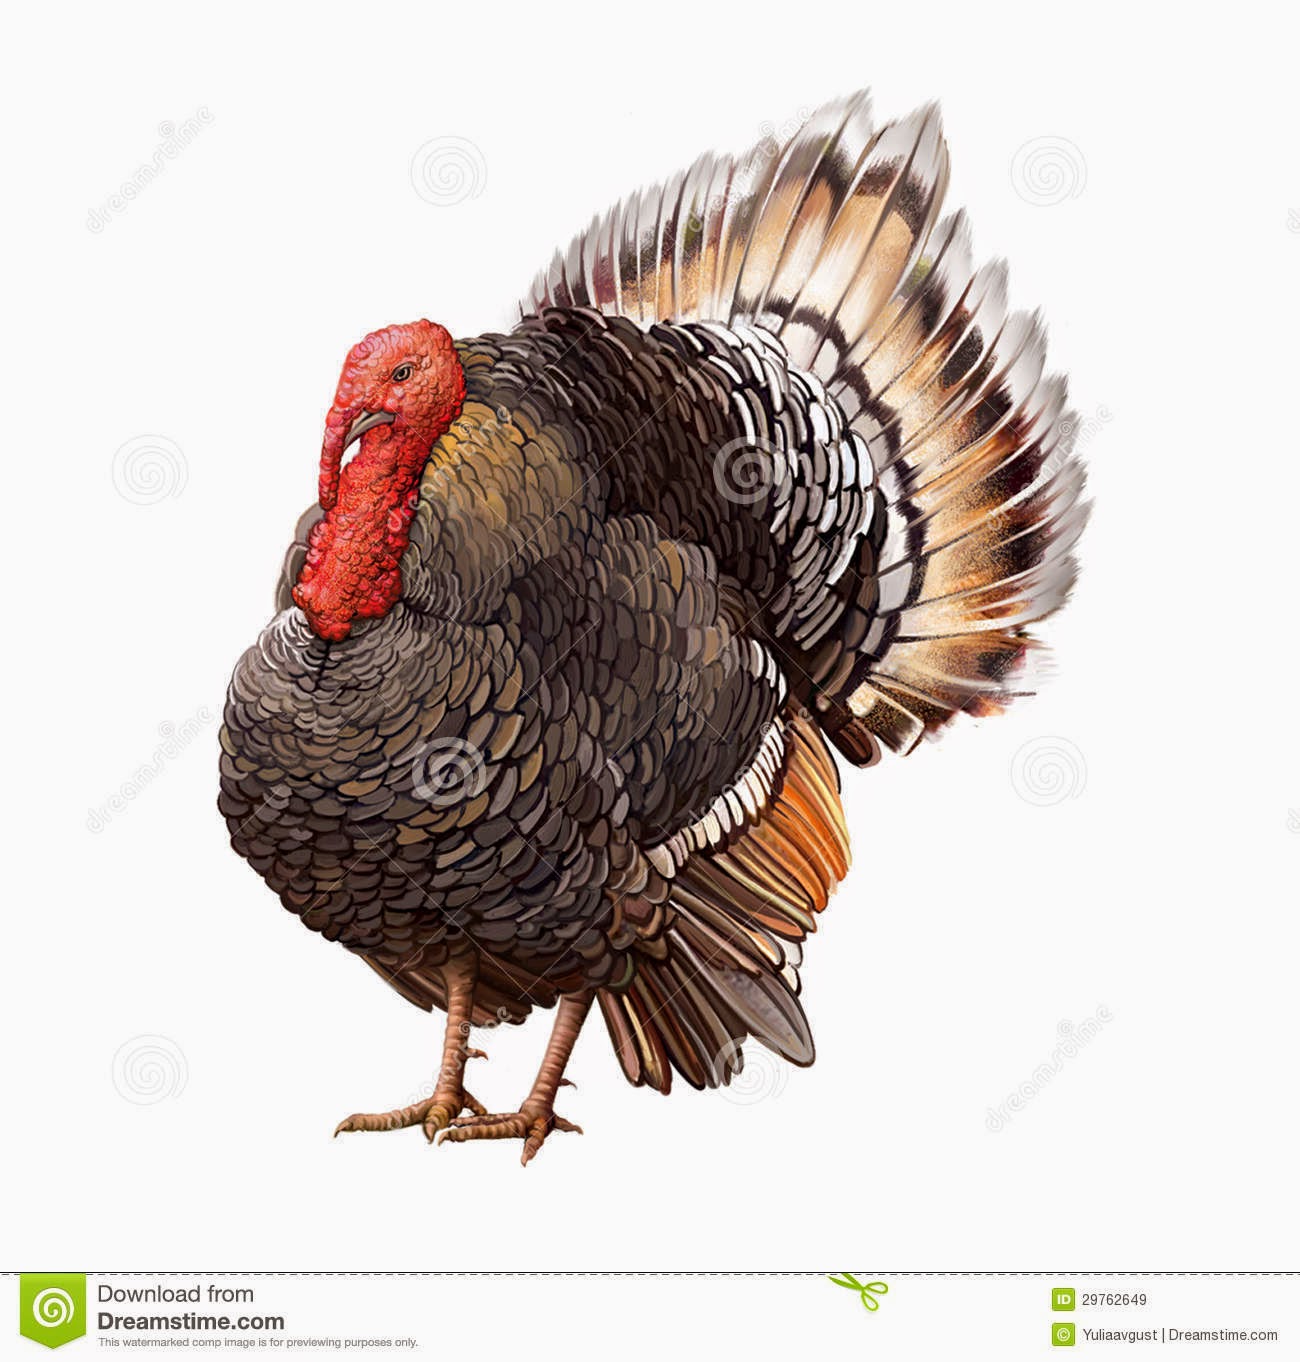 What is the flap of skin under a turkeys chin called?